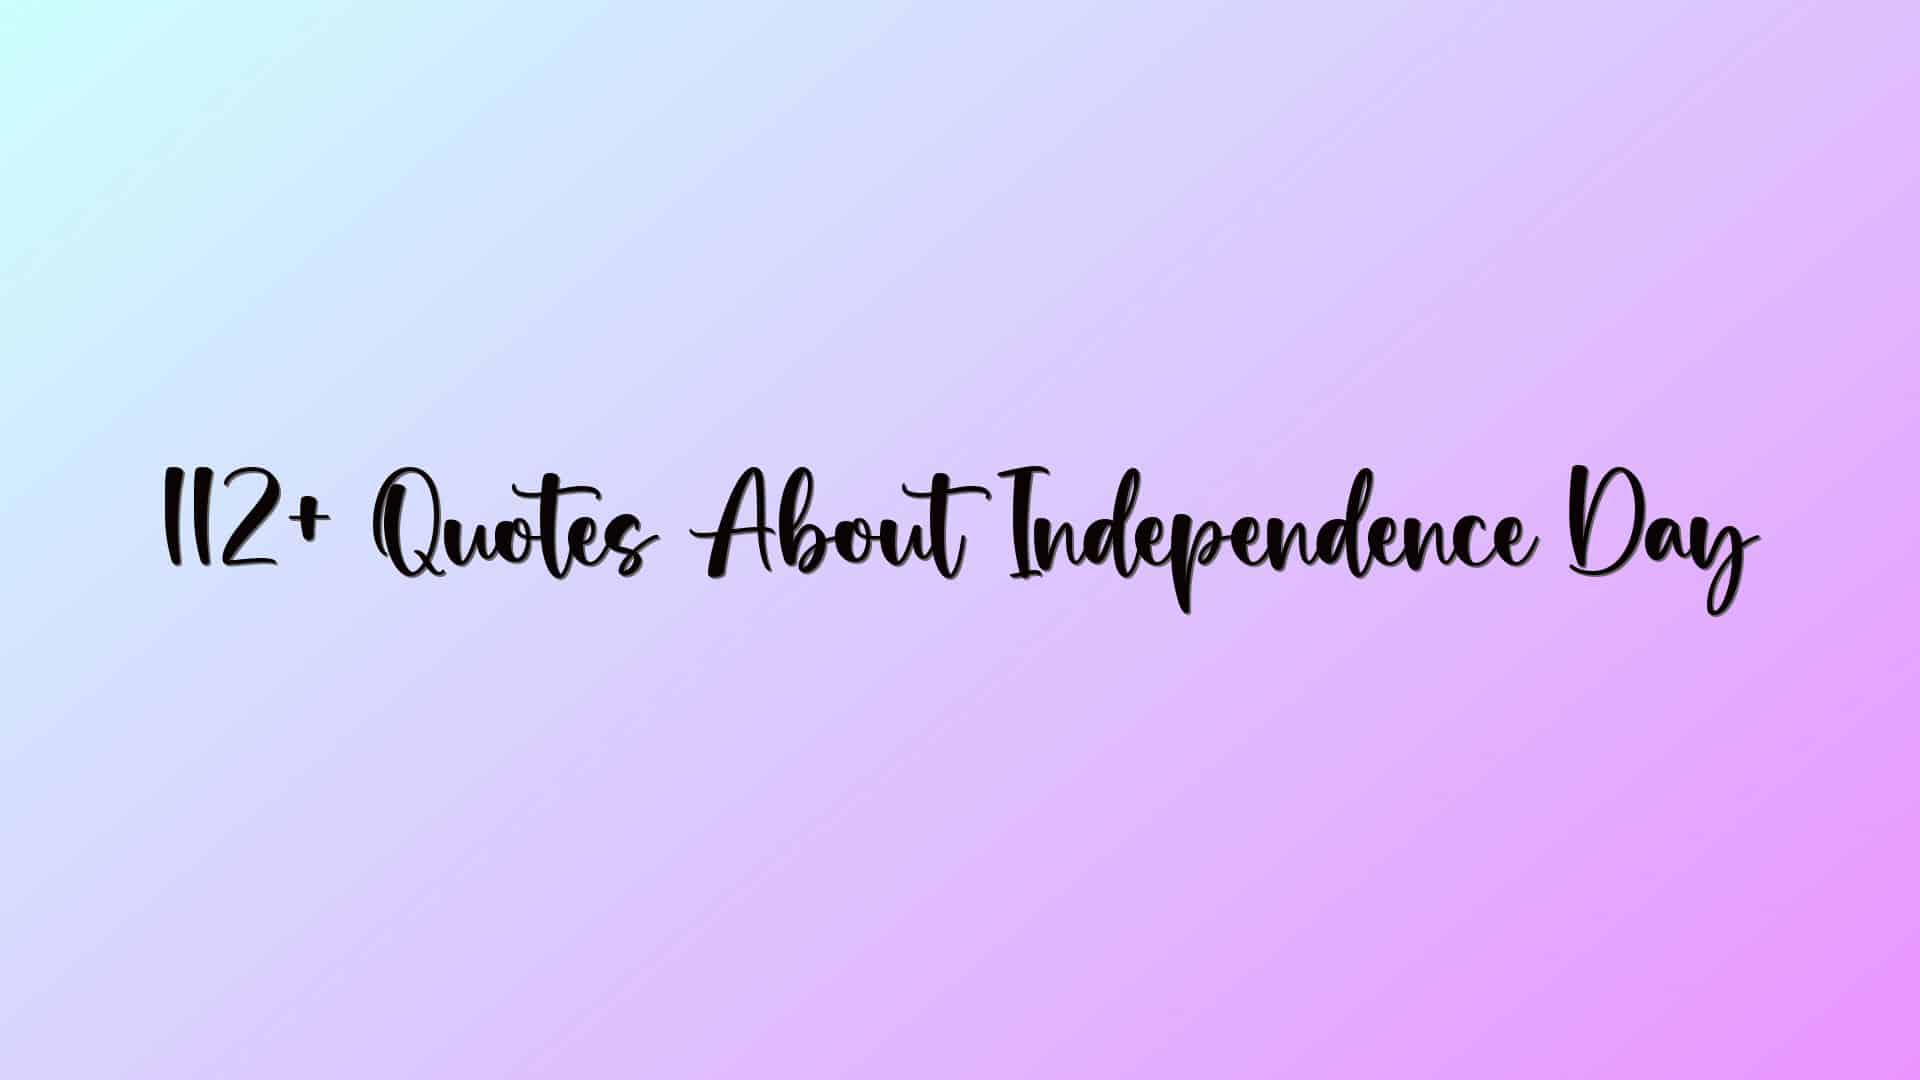 112+ Quotes About Independence Day